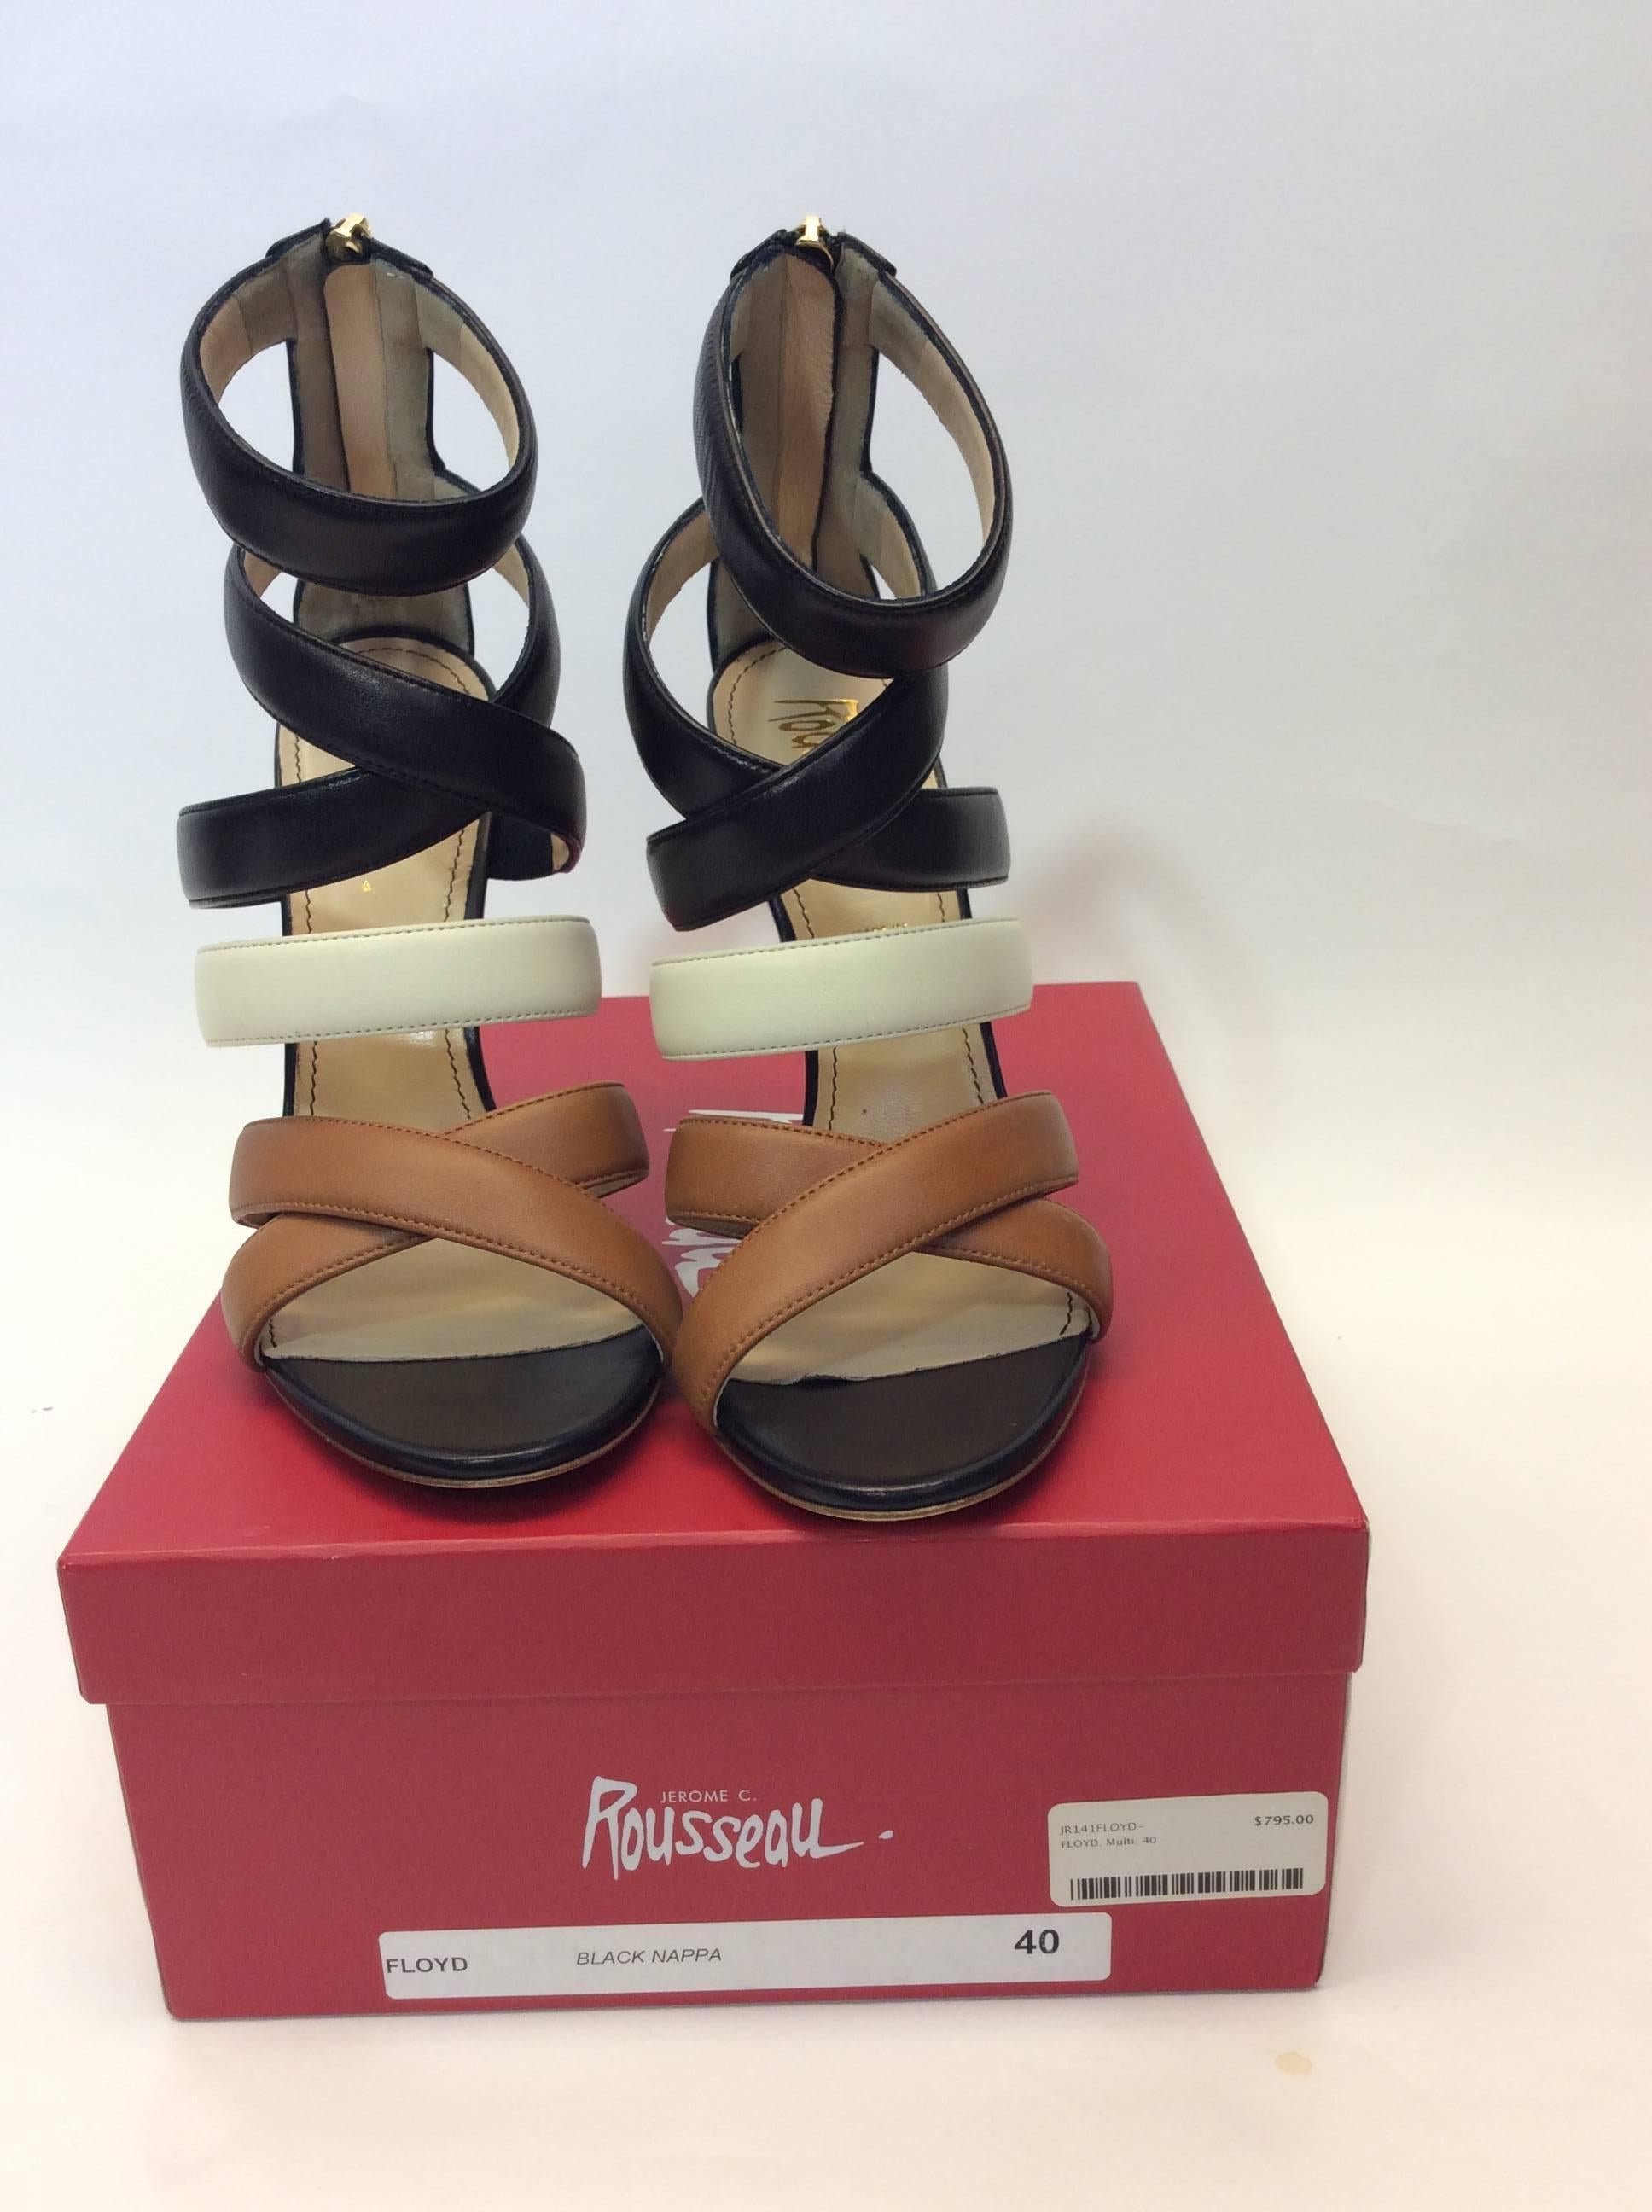 Jerome C Rousseau Floyd Multi Strappy Leather Heels For Sale 1